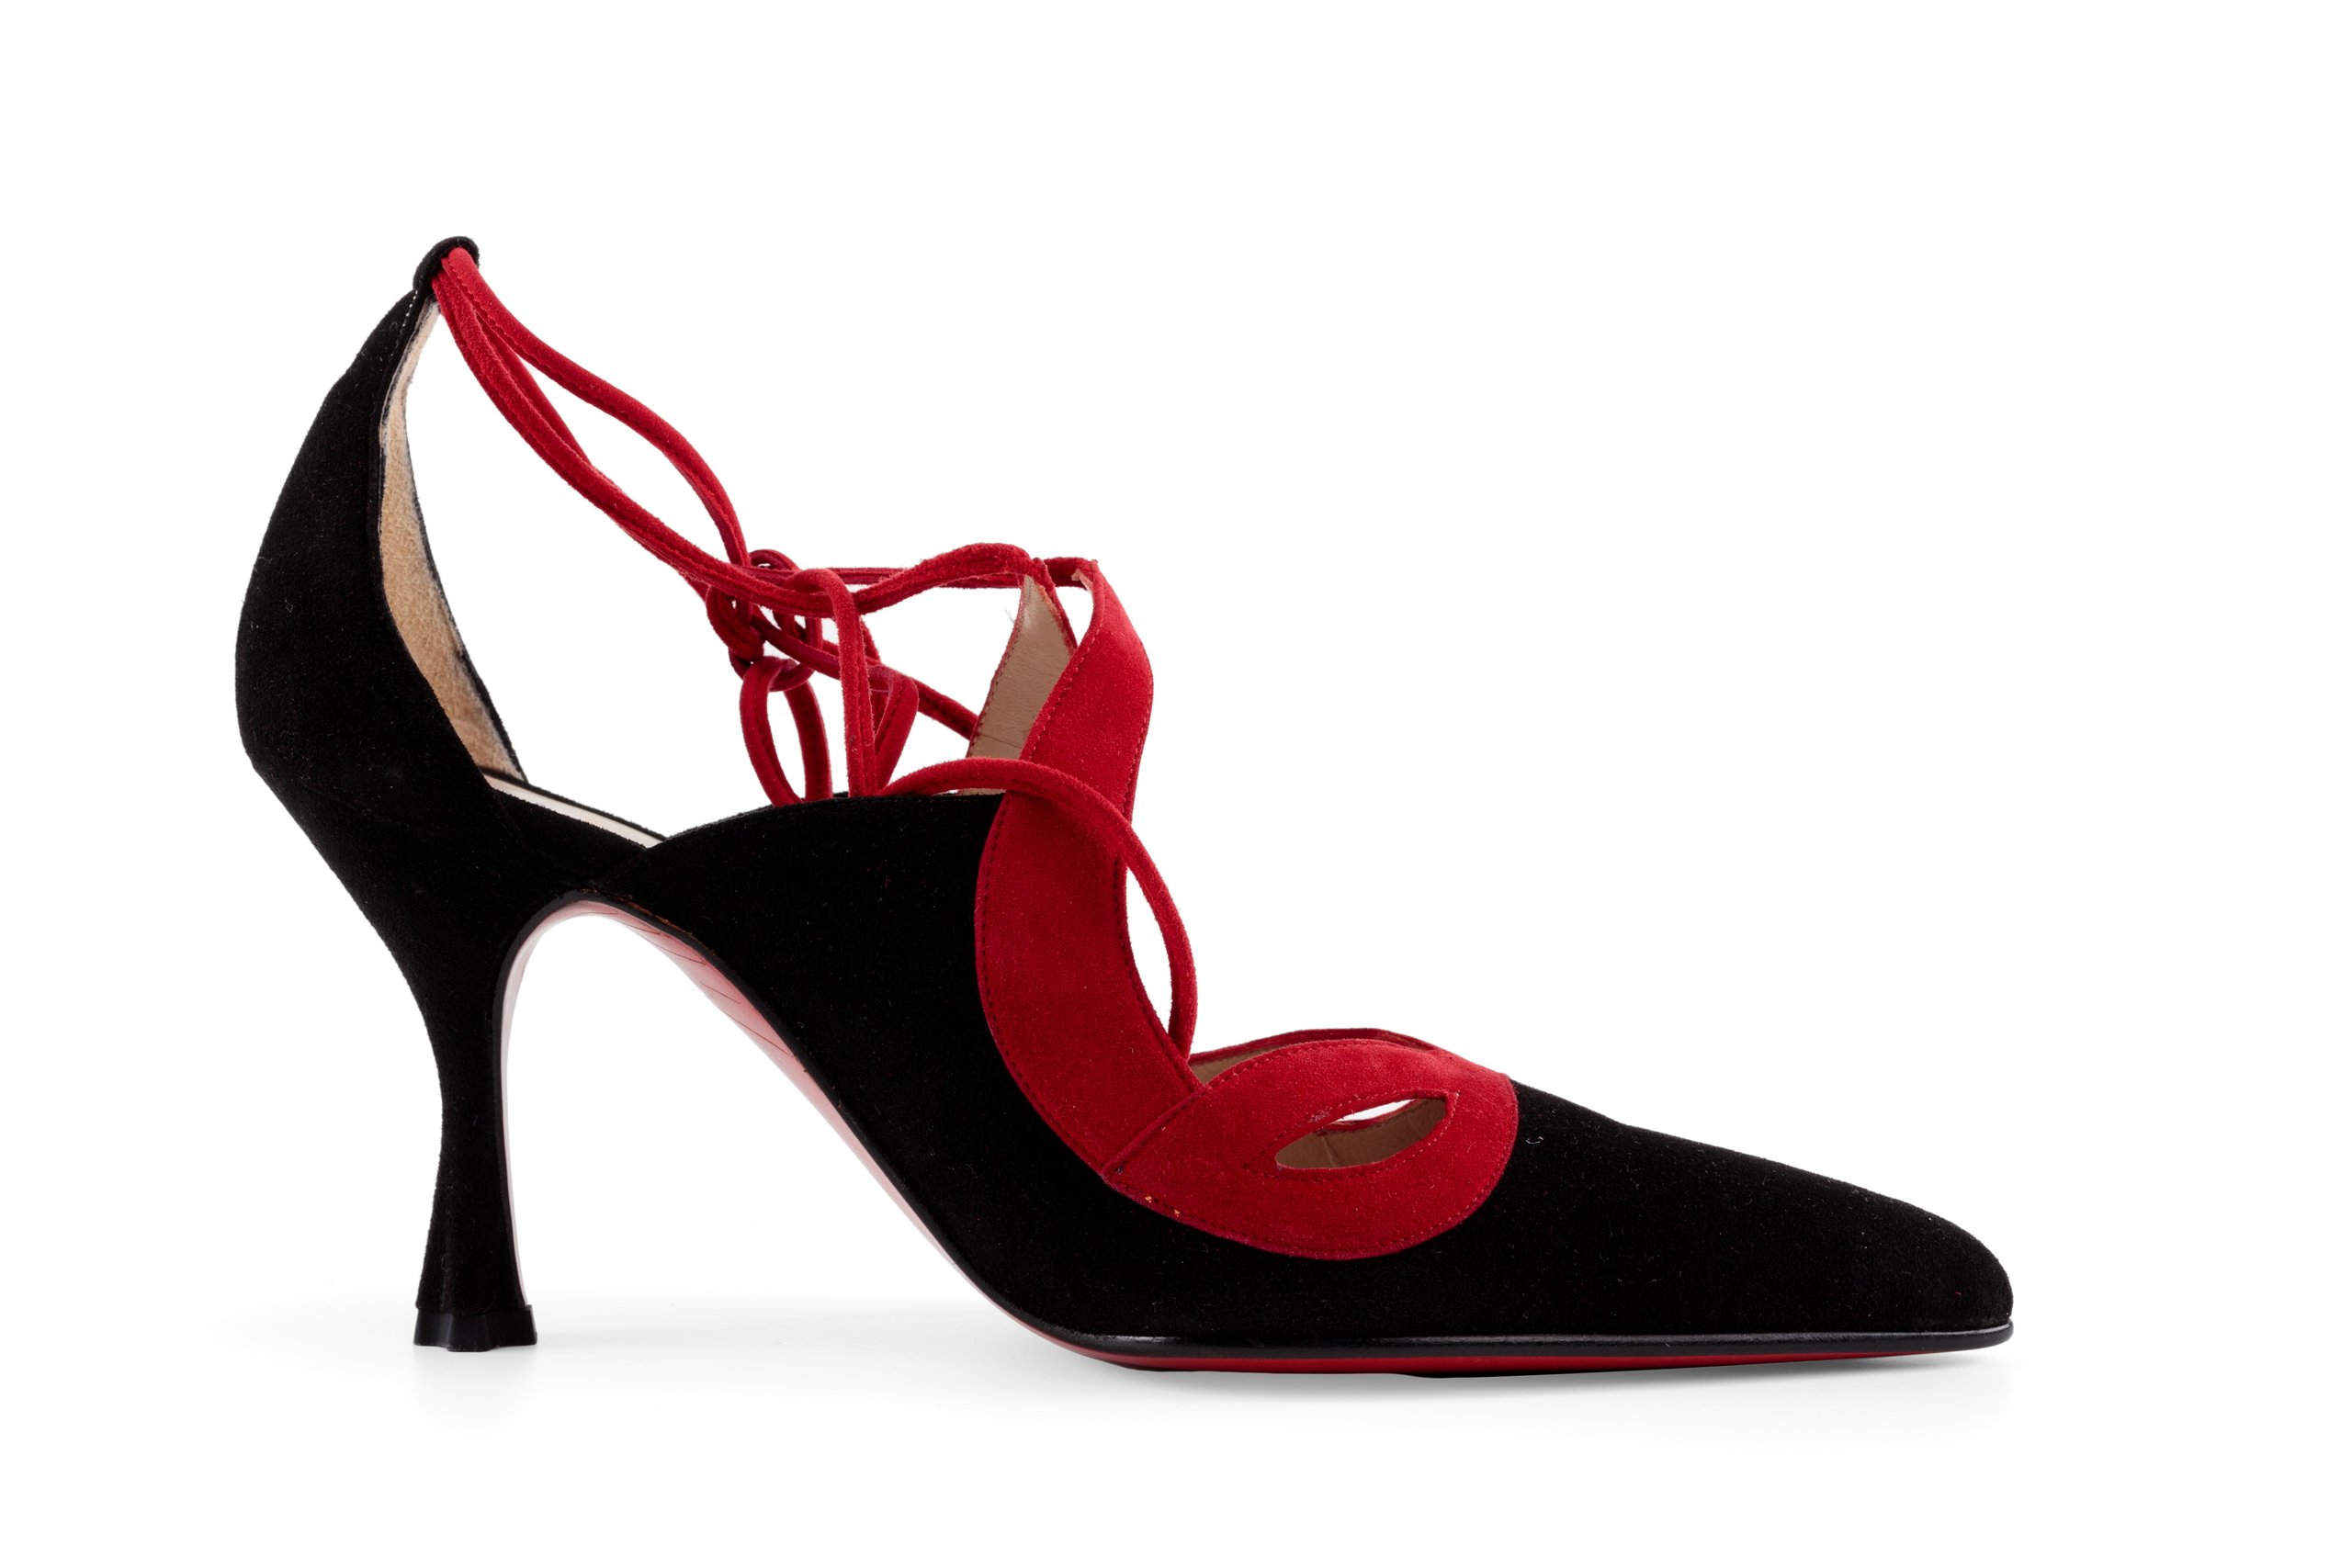 Pair of womens 'Maskovitch' shoes by Christian Louboutin